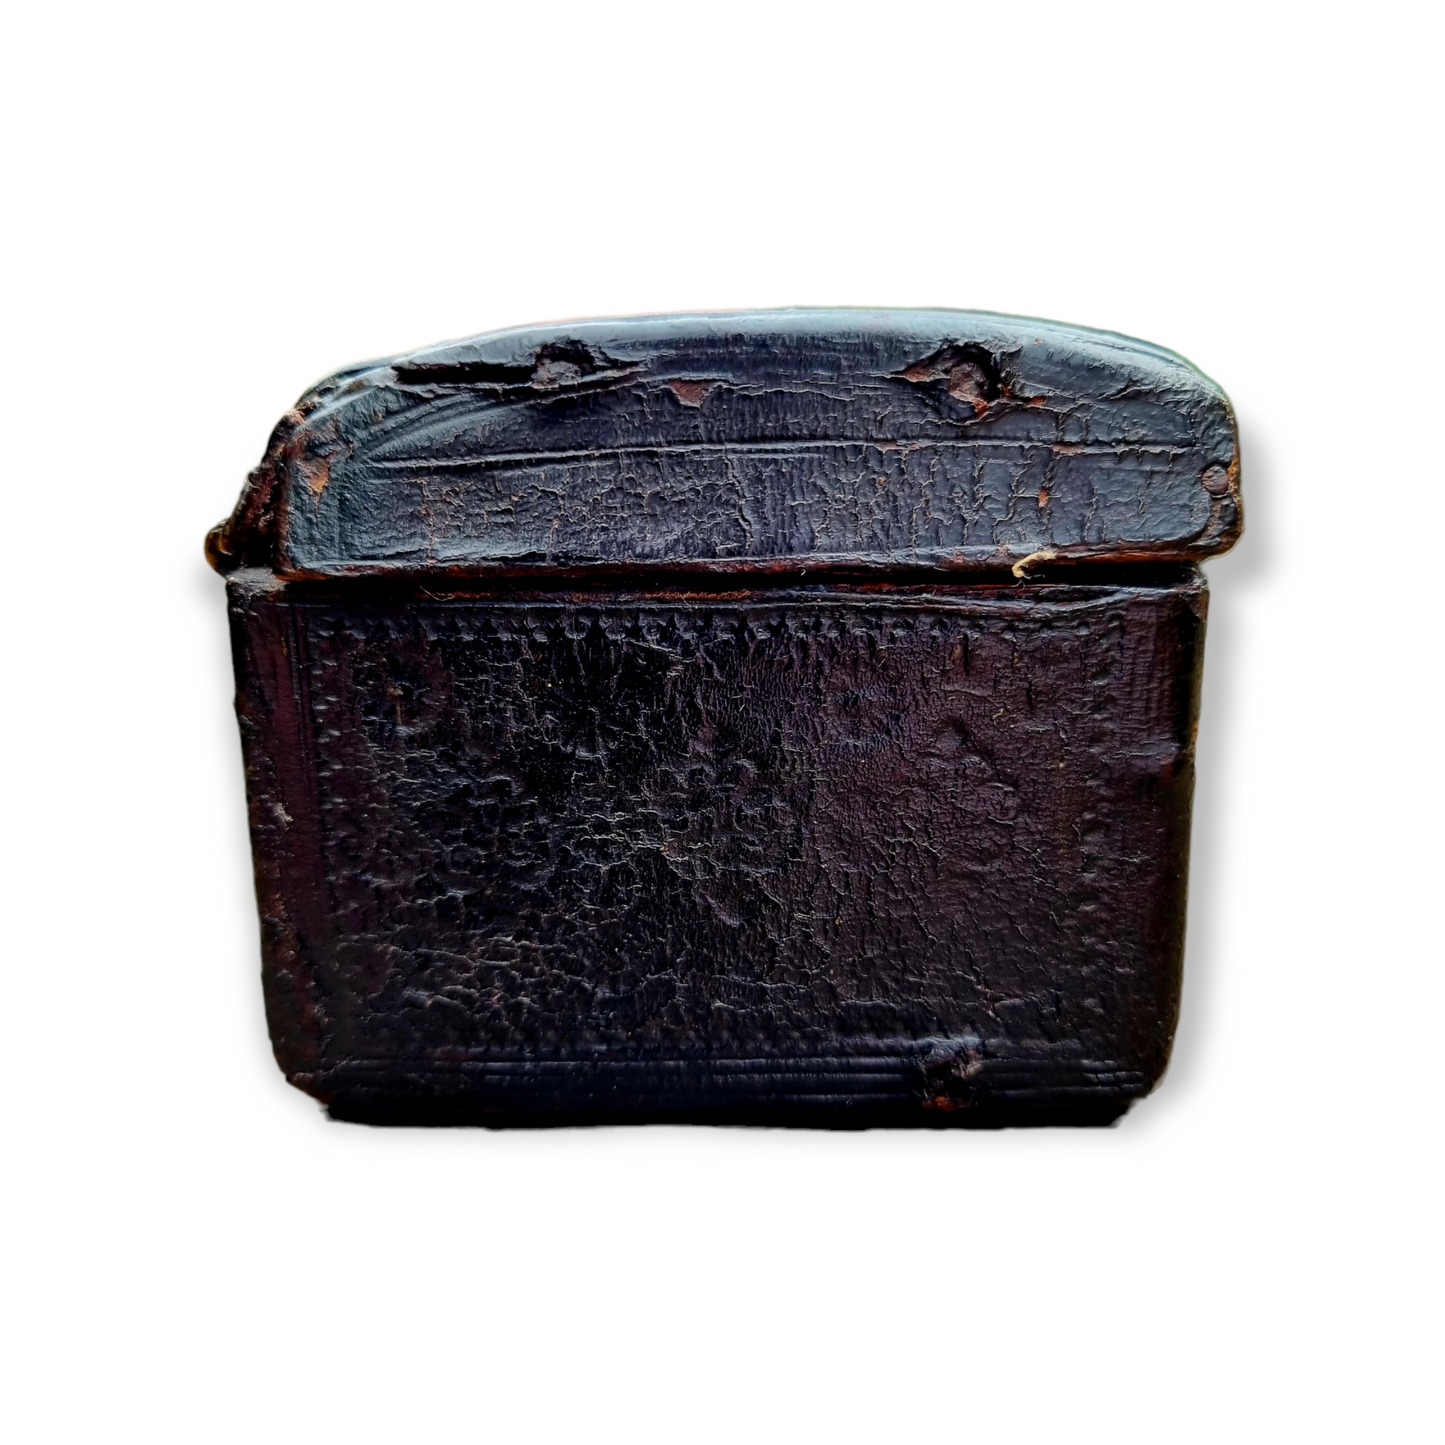 Diminutive 16th Century Antique Leather and Iron-Bound Missal Box